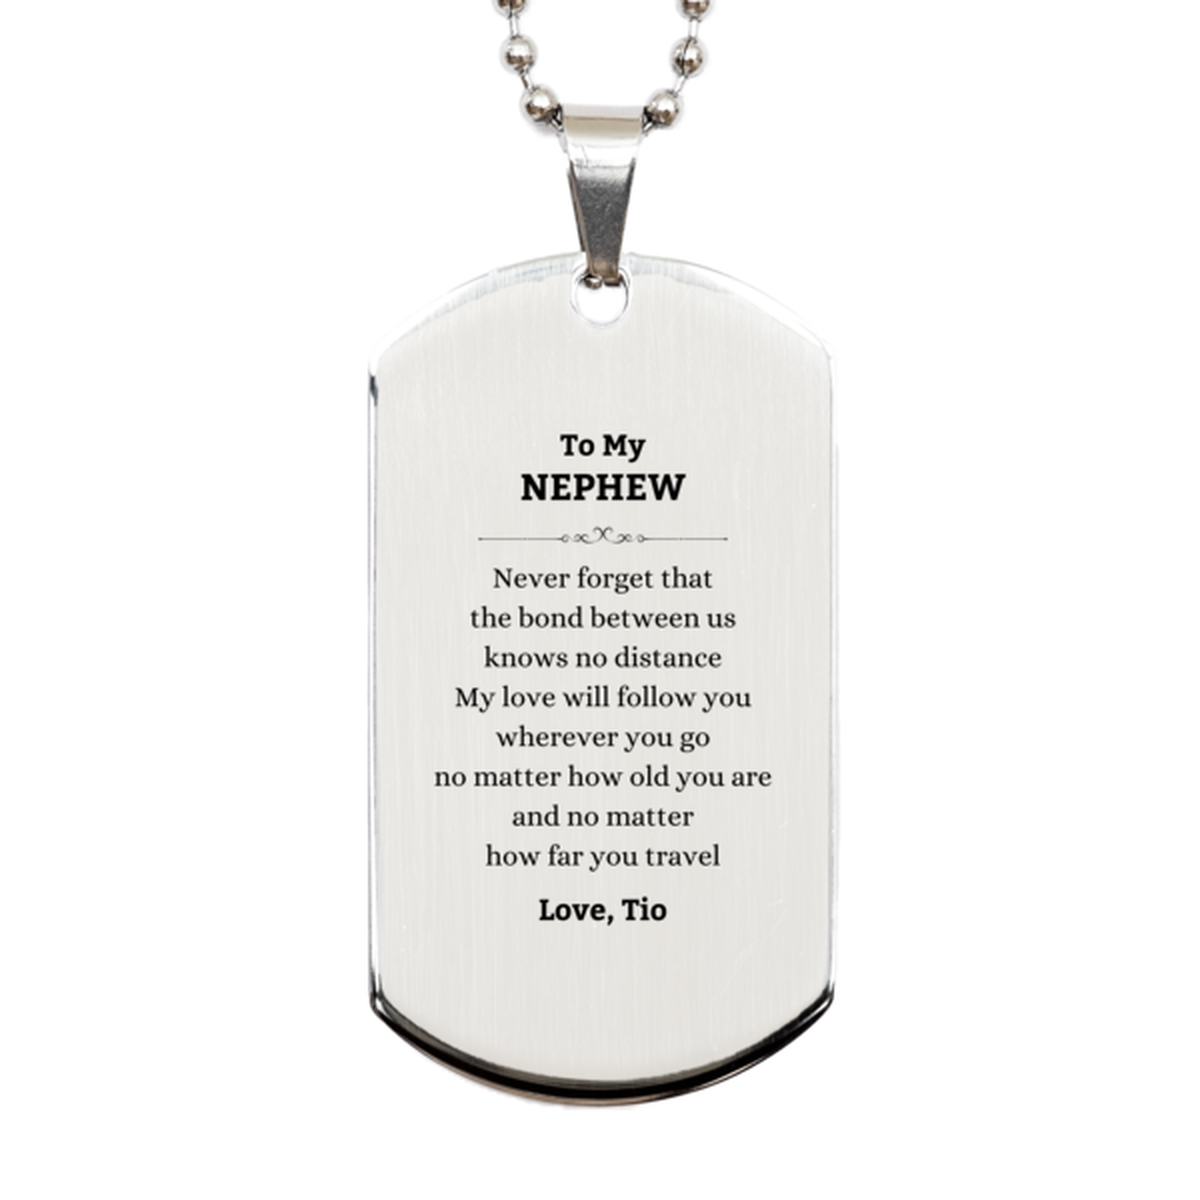 Nephew Birthday Gifts from Tio, Adjustable Silver Dog Tag for Nephew Christmas Graduation Unique Gifts Nephew Never forget that the bond between us knows no distance. Love, Tio